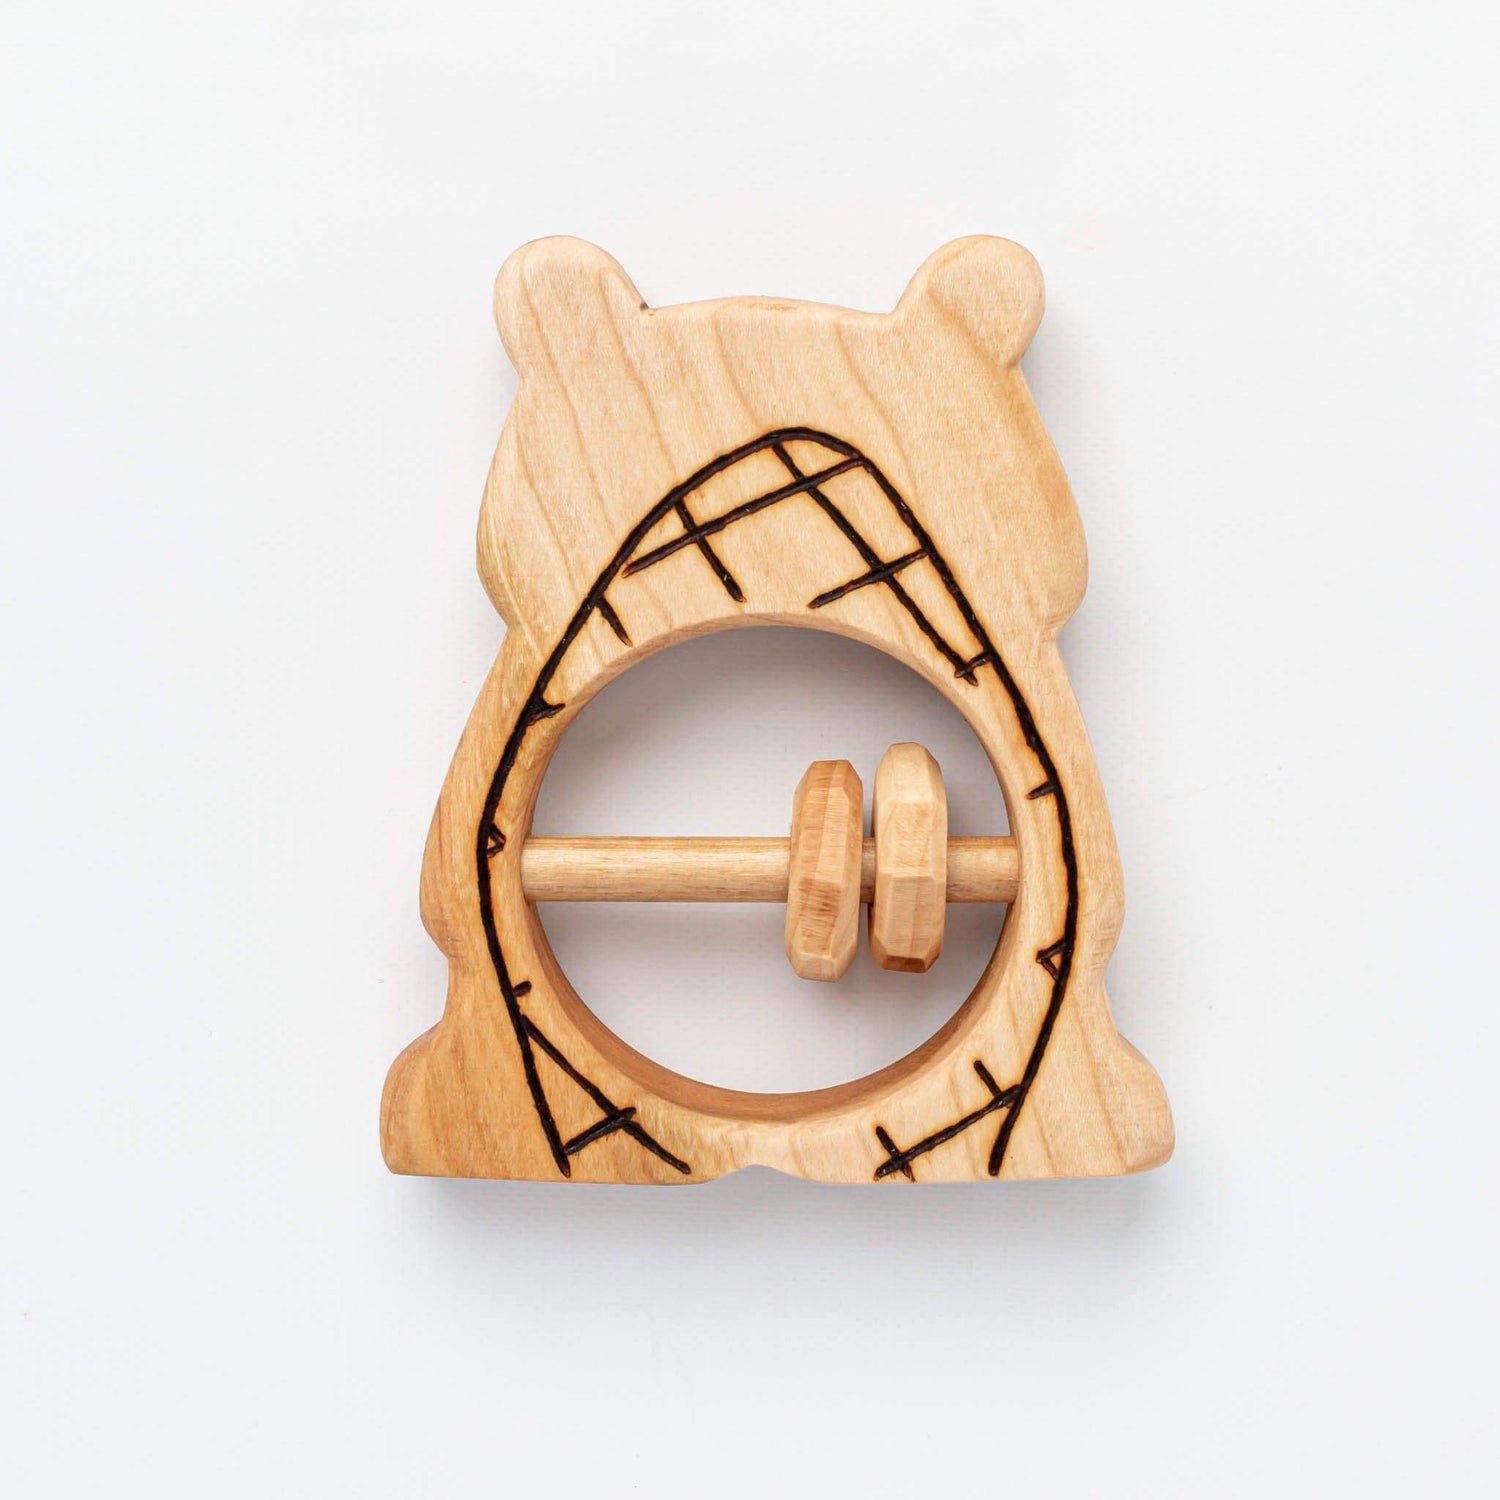 The Wooden Kind Teether Handmade Beaver Rattle & Teething Toy